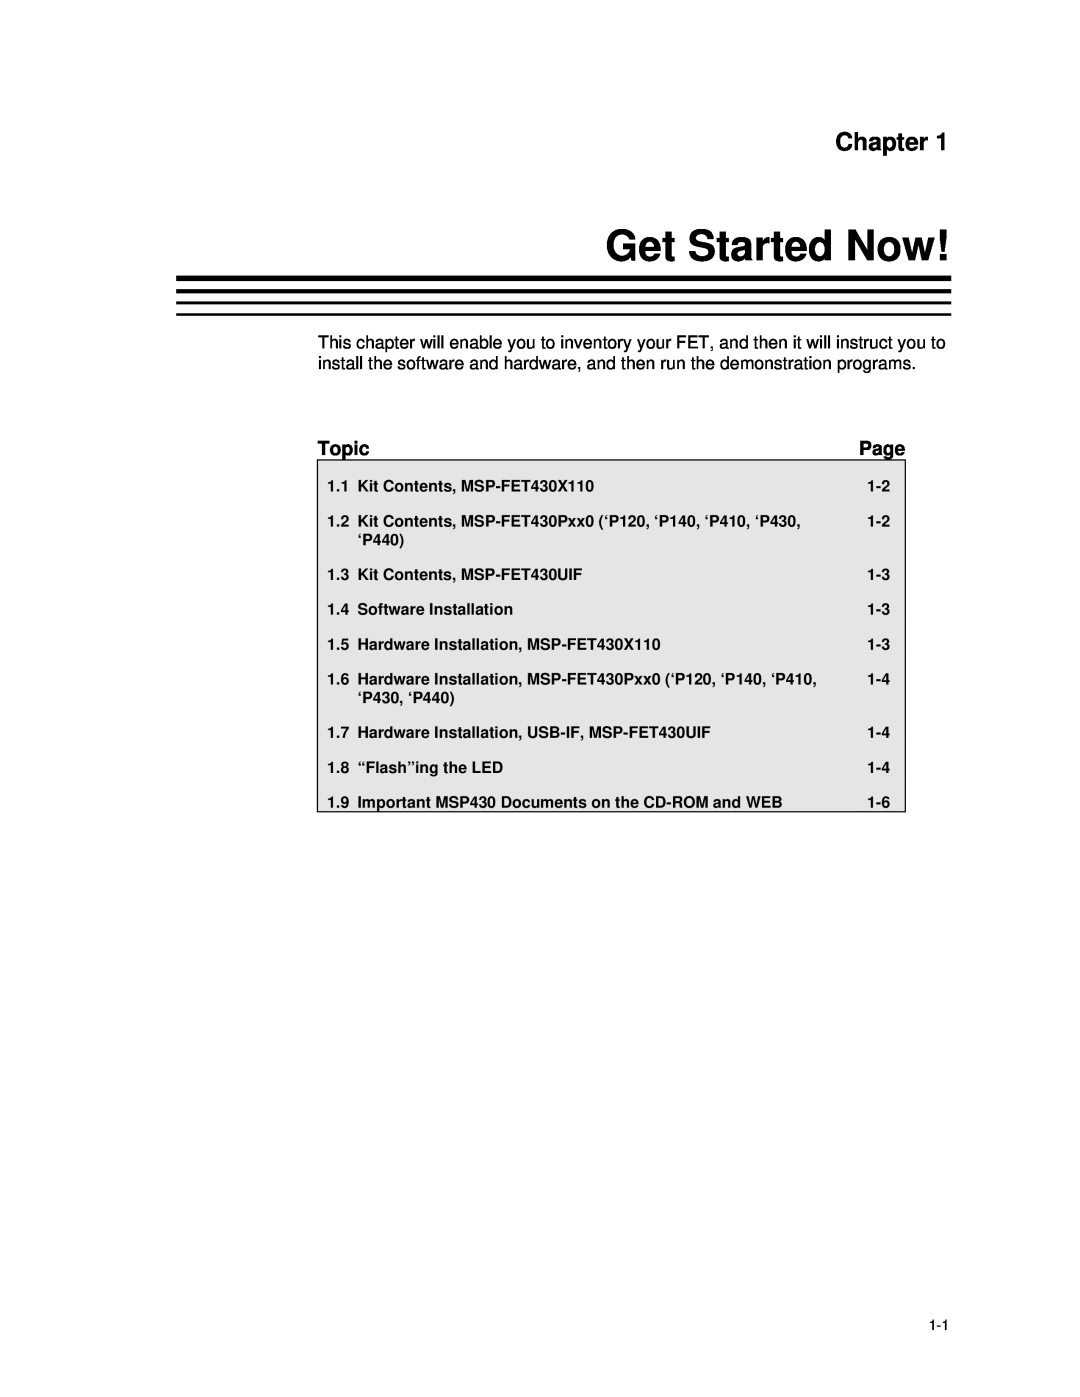 Texas Instruments MSP-FET430 manual Get Started Now, Chapter 